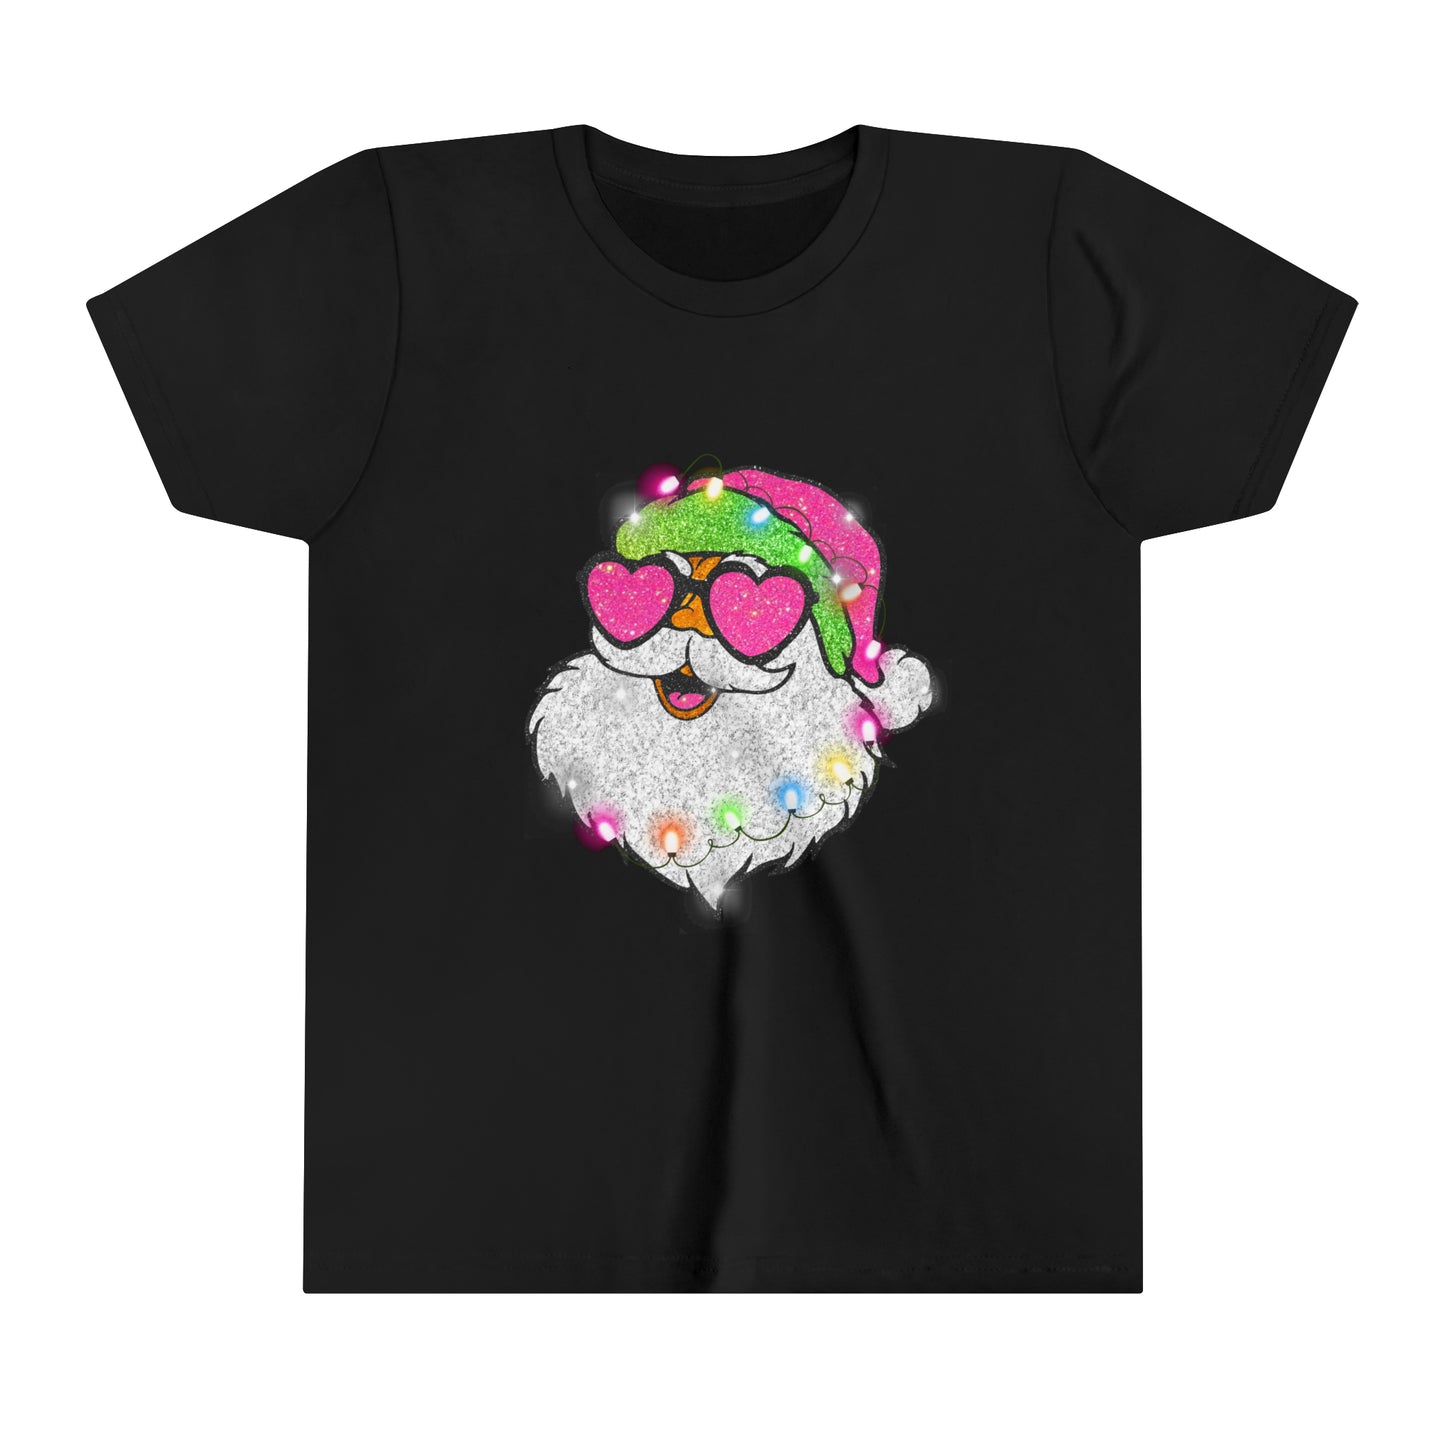 Santa with Glasses Youth Tee